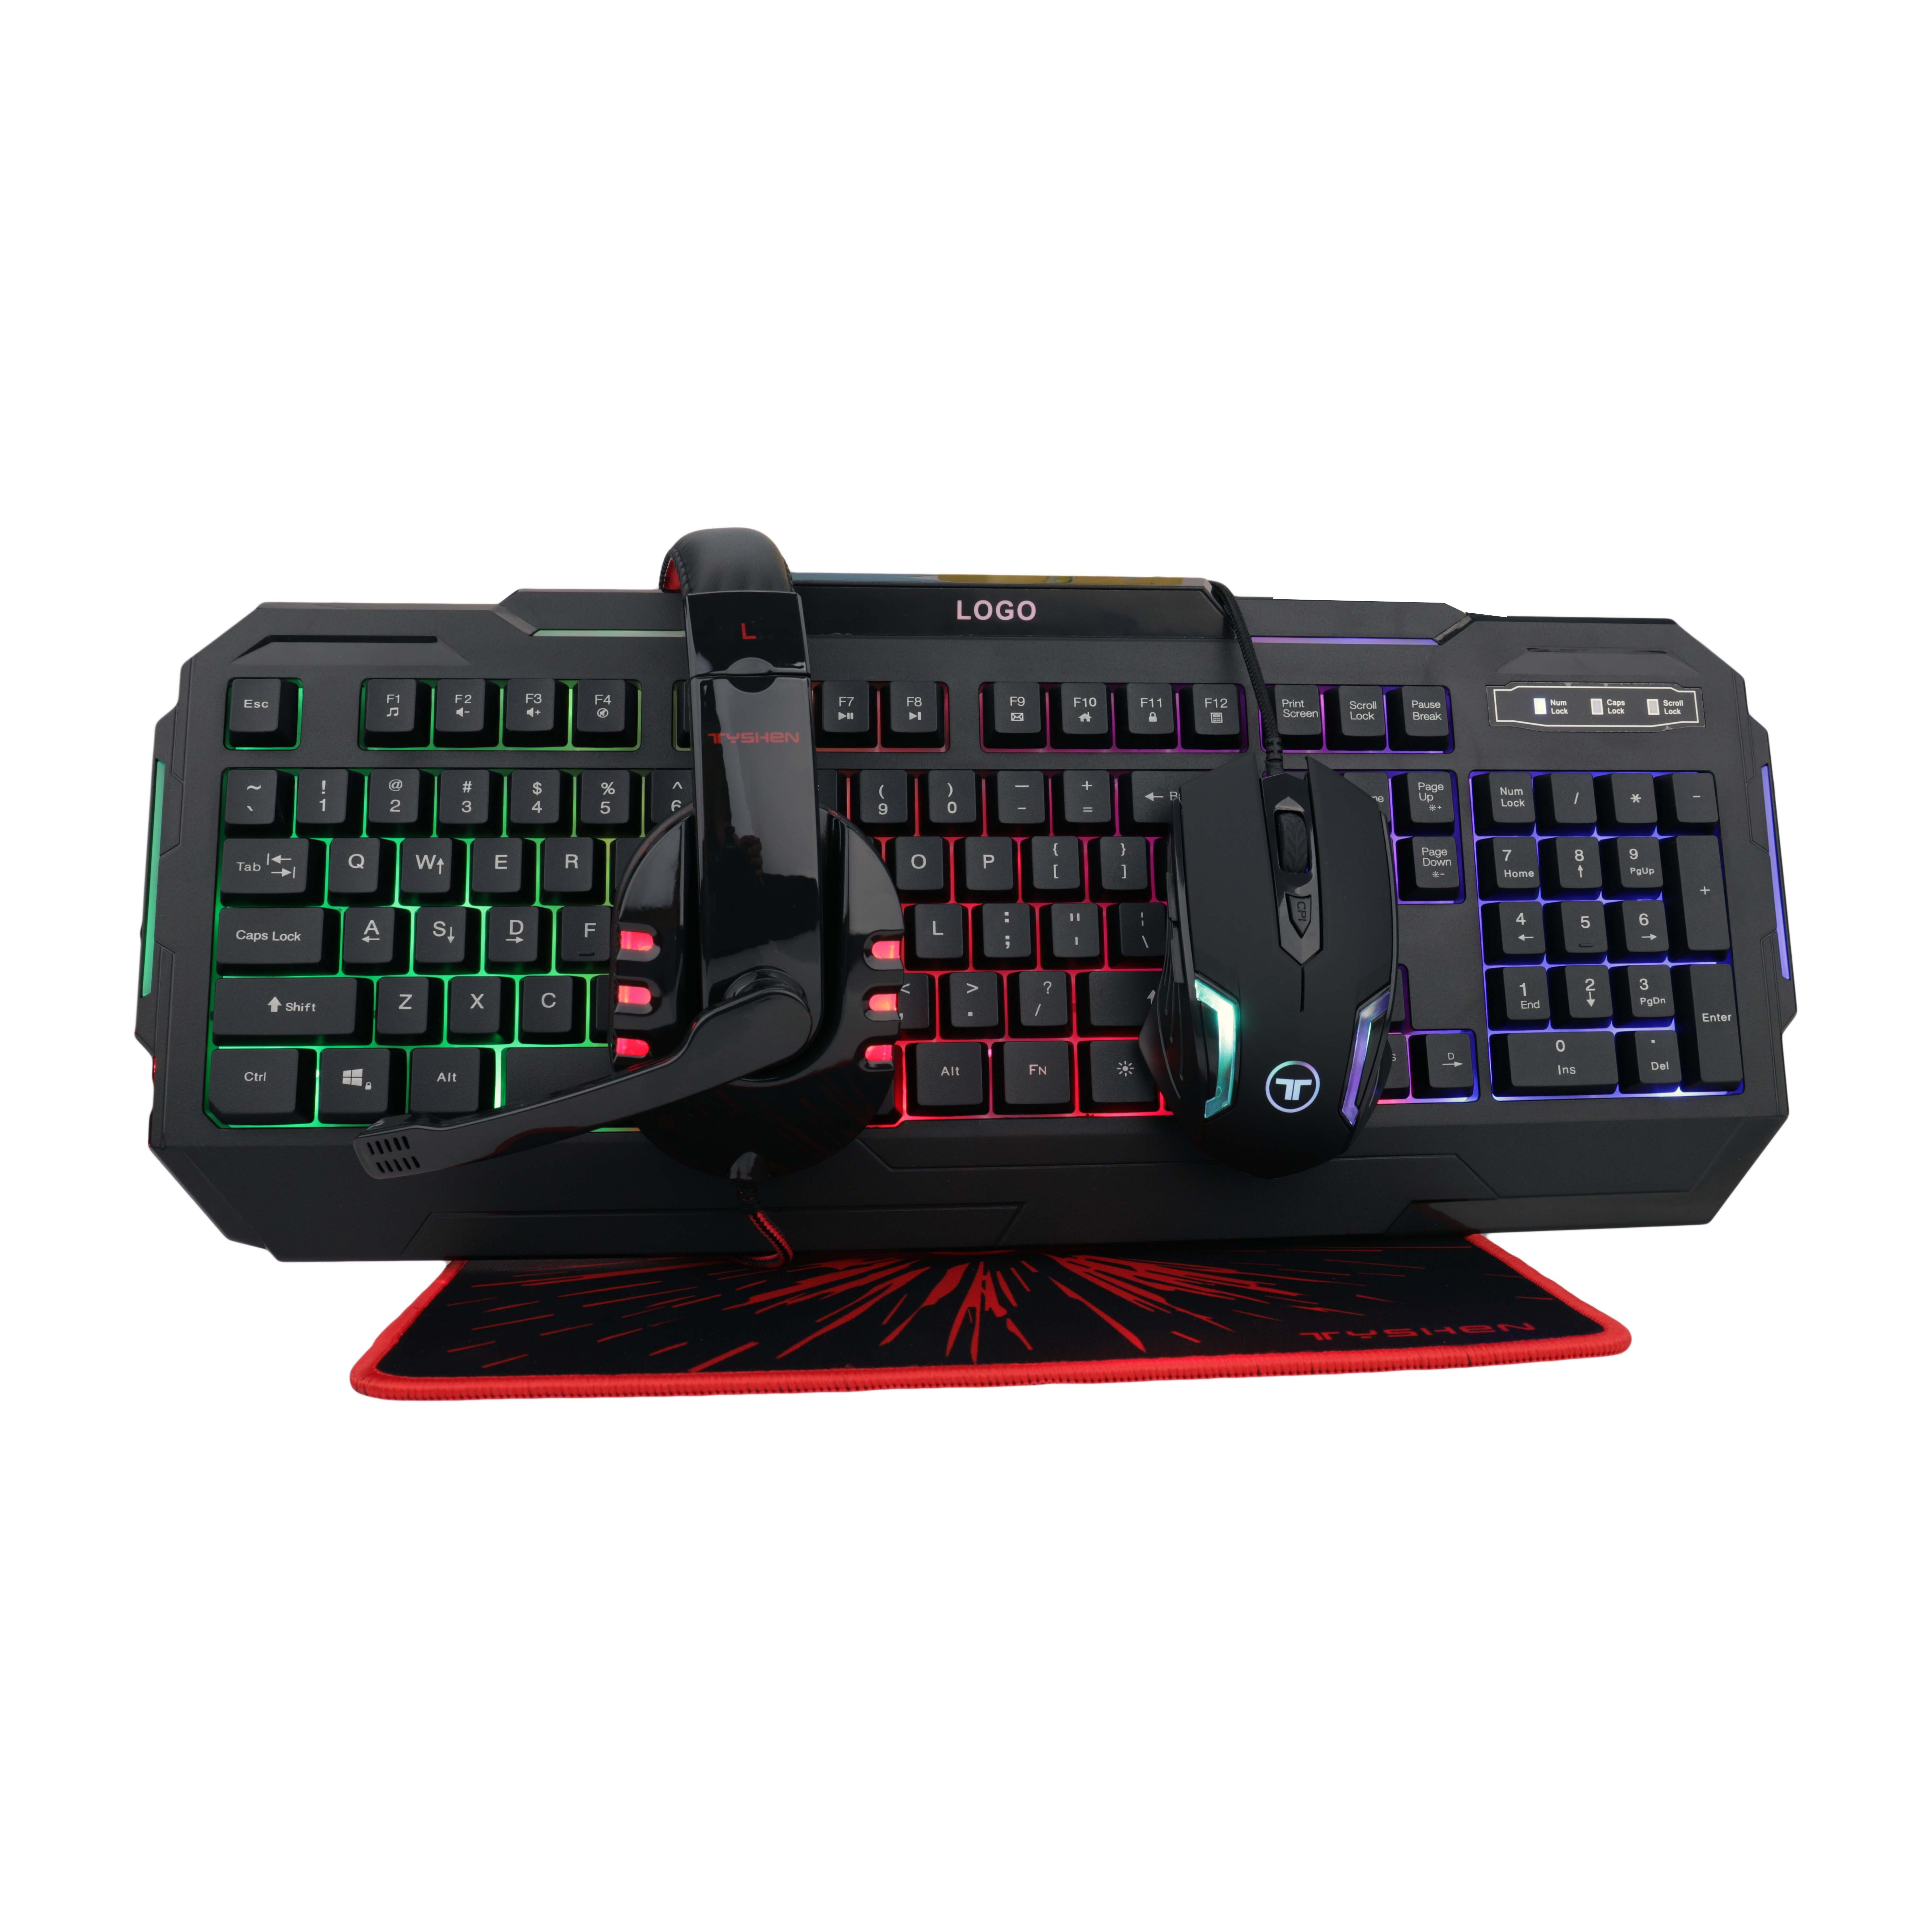 USB wired RGB backlighted Gaming Mouse and Keyboard Combo razer with feeling headset mouse pad for gamer gaming use not wireless